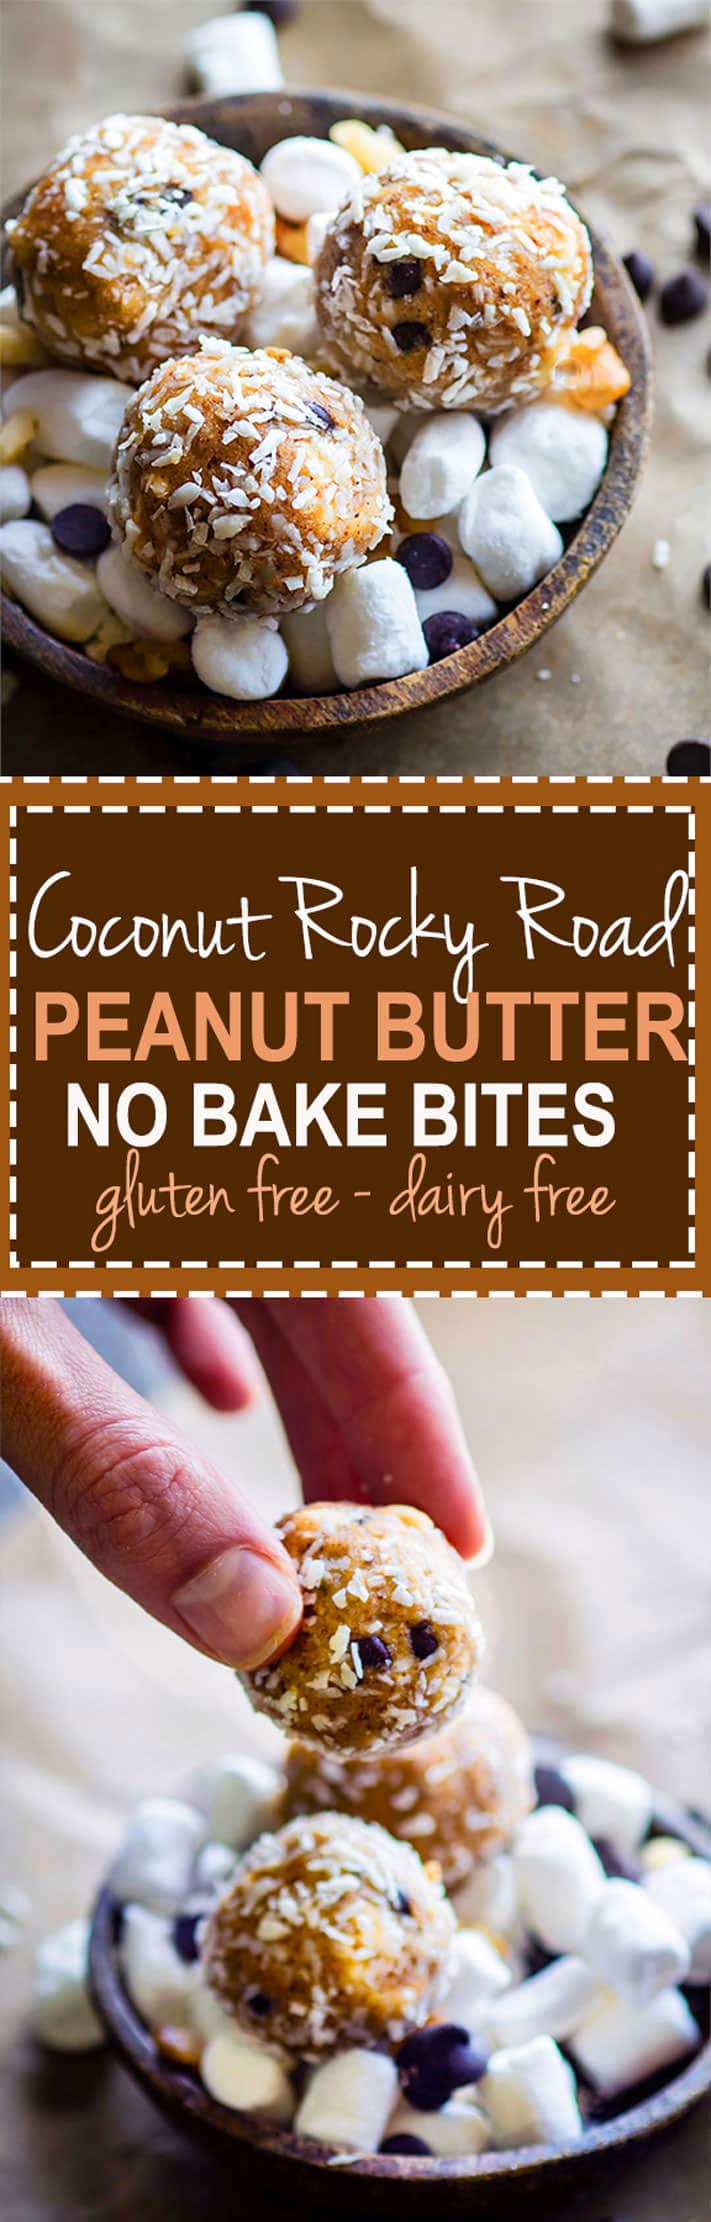 Gluten Free Coconut Rocky Road Peanut Butter Bites. Super simple no bake peanut butter bites that are packed with a rocky road and coconut filling! Made with natural ingredients that are dairy free, grain free, and healthy! Great for kids, snacking, and real food fuel for all.